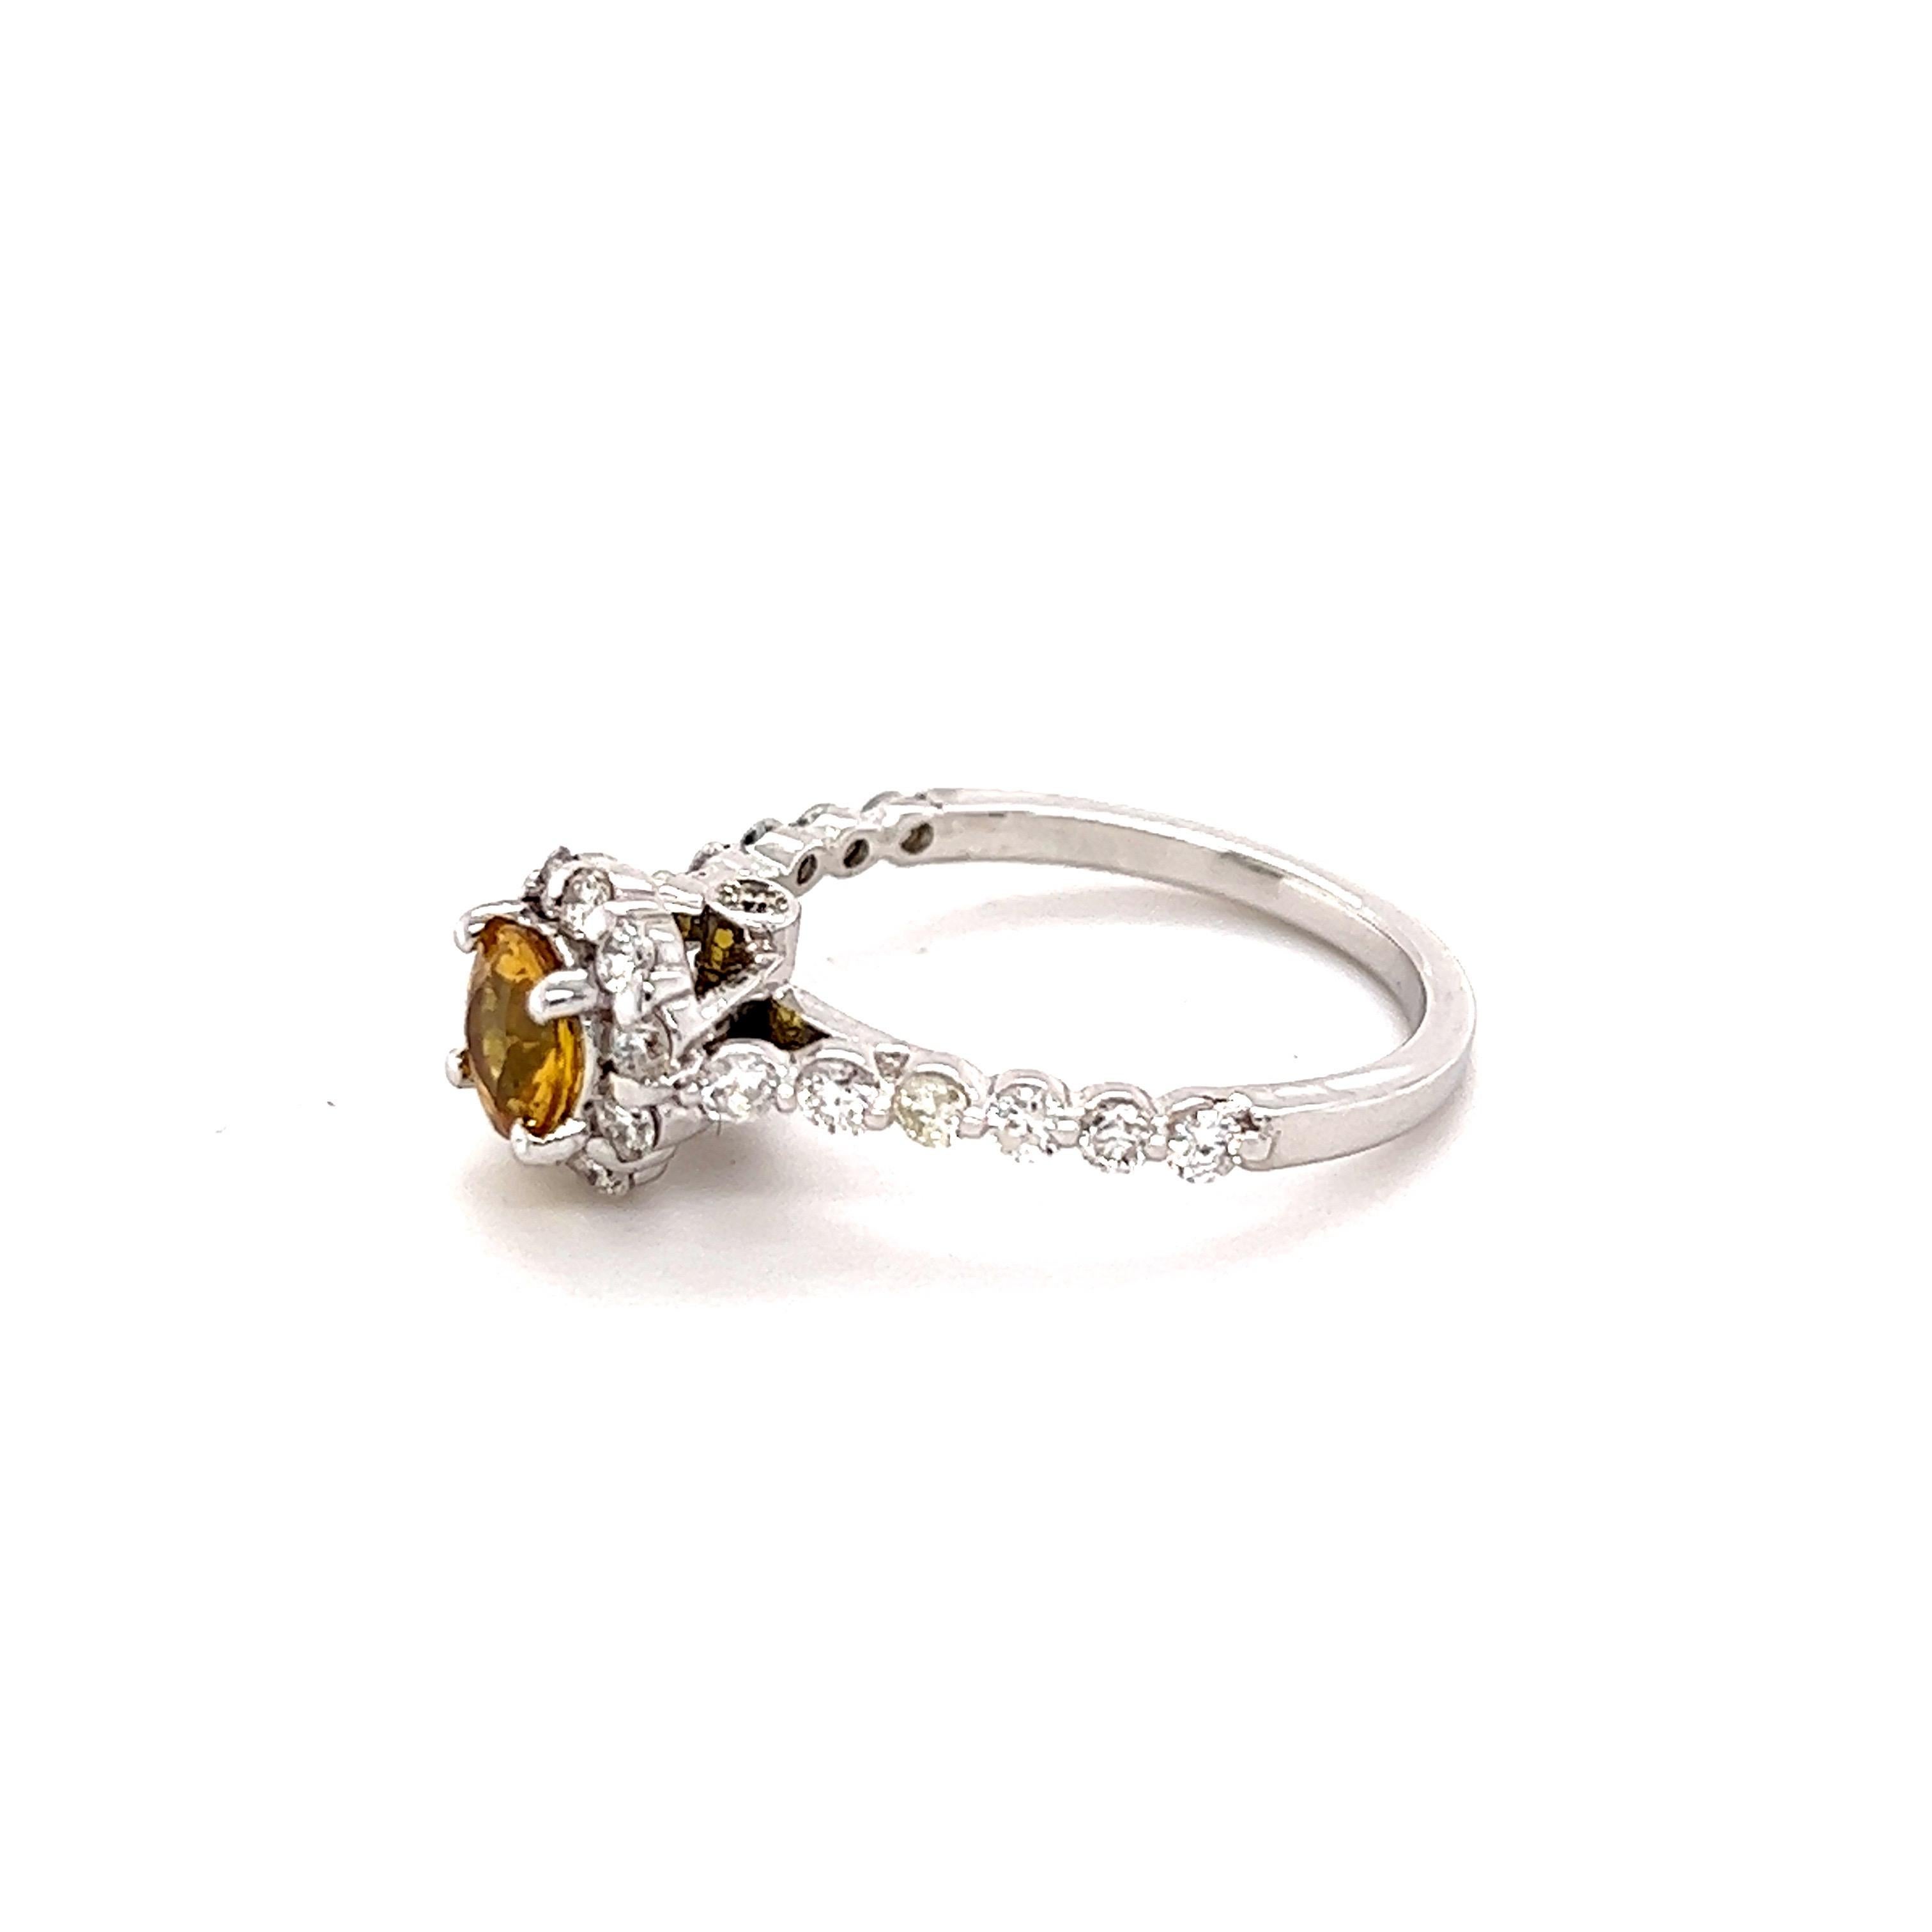 Contemporary 1.37 Carat Yellow Sapphire Diamond White Gold Engagement Ring For Sale